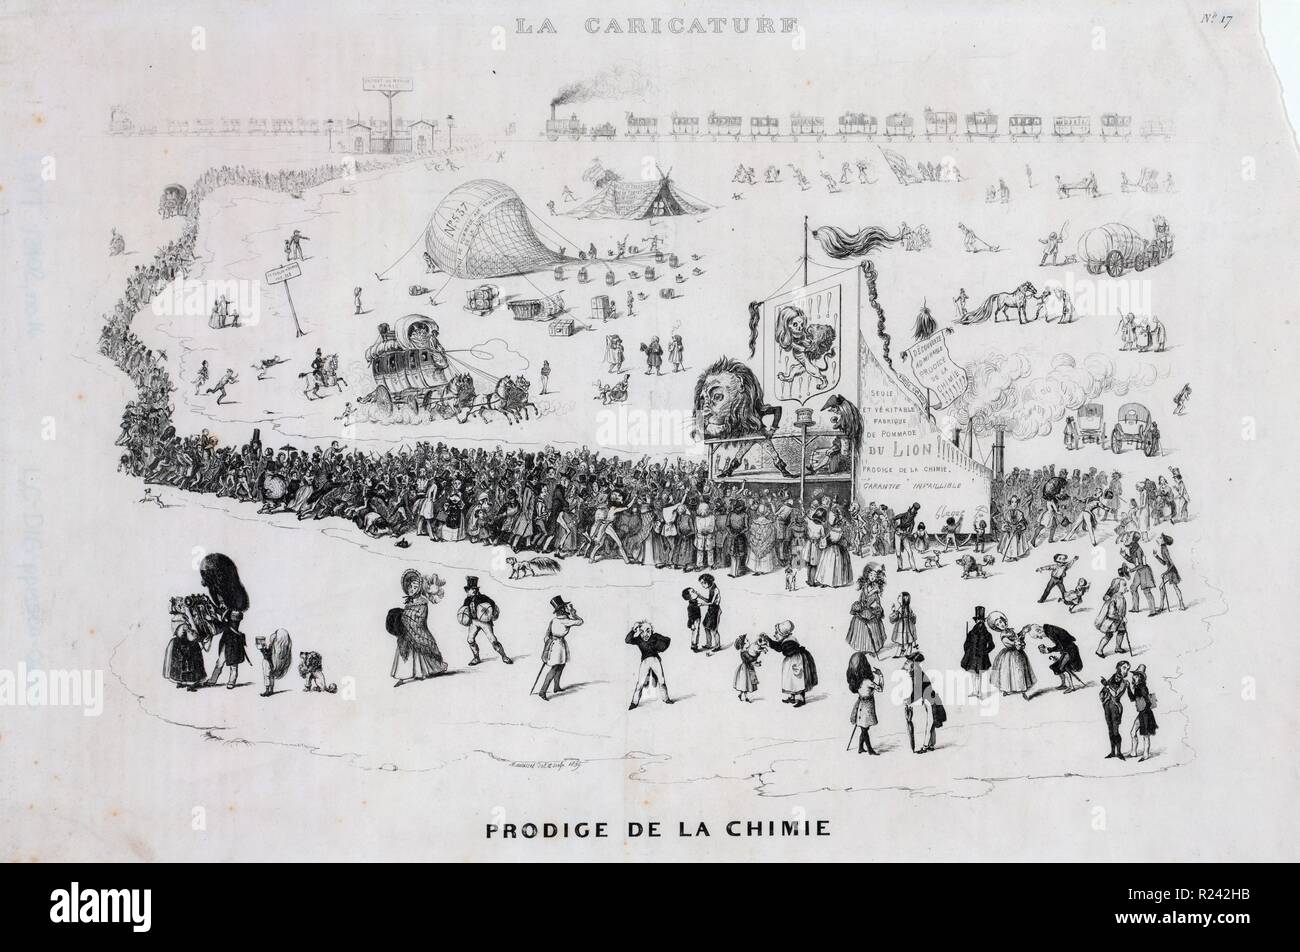 French cartoon shows a long line of people, with more arriving by stagecoach and railroad, at a medicine show where a quack with a lion's head, the 'Prodige de la chimie,' is marketing his hair tonic 'De pommade du lion.' In the centre, a balloon 'Envoi de pommade aux habitants de la lune' is being inflated. 1839 Stock Photo